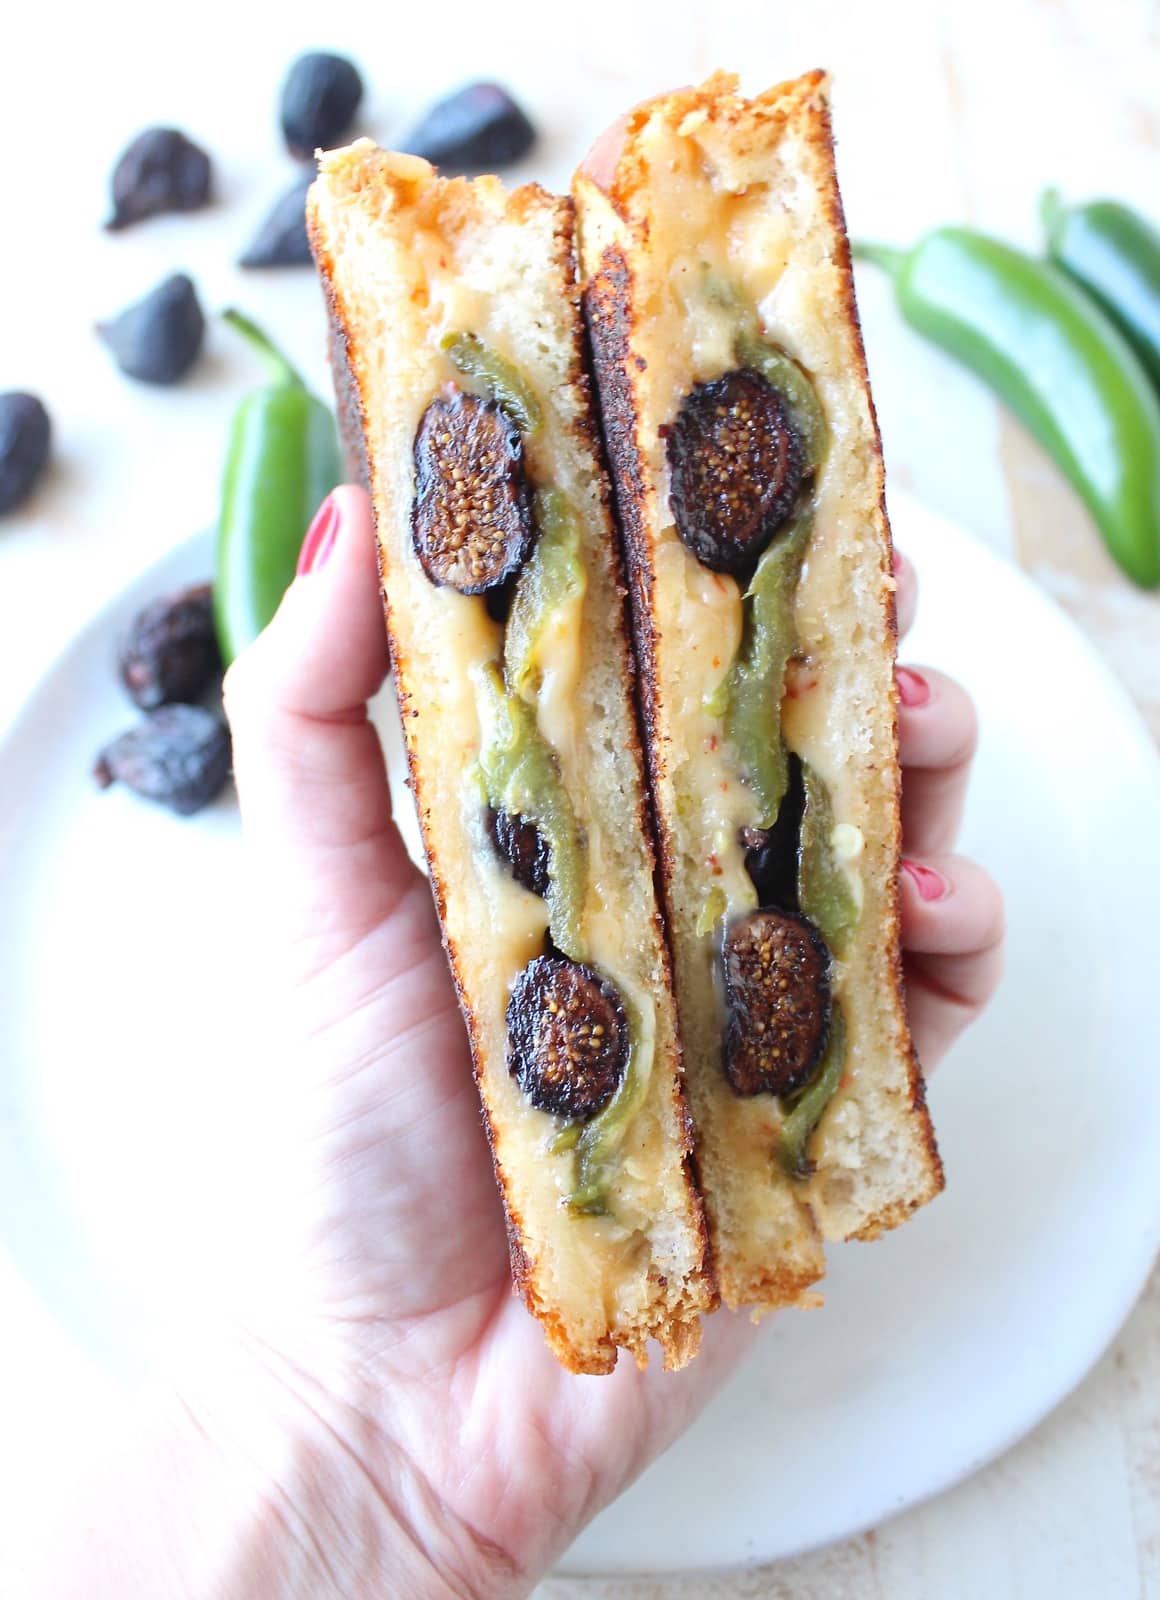 Roasted jalapeños, dried figs and spicy cheddar cheese are combined in this delicious, sweet and spicy, vegetarian jalapeno grilled cheese sandwich recipe!